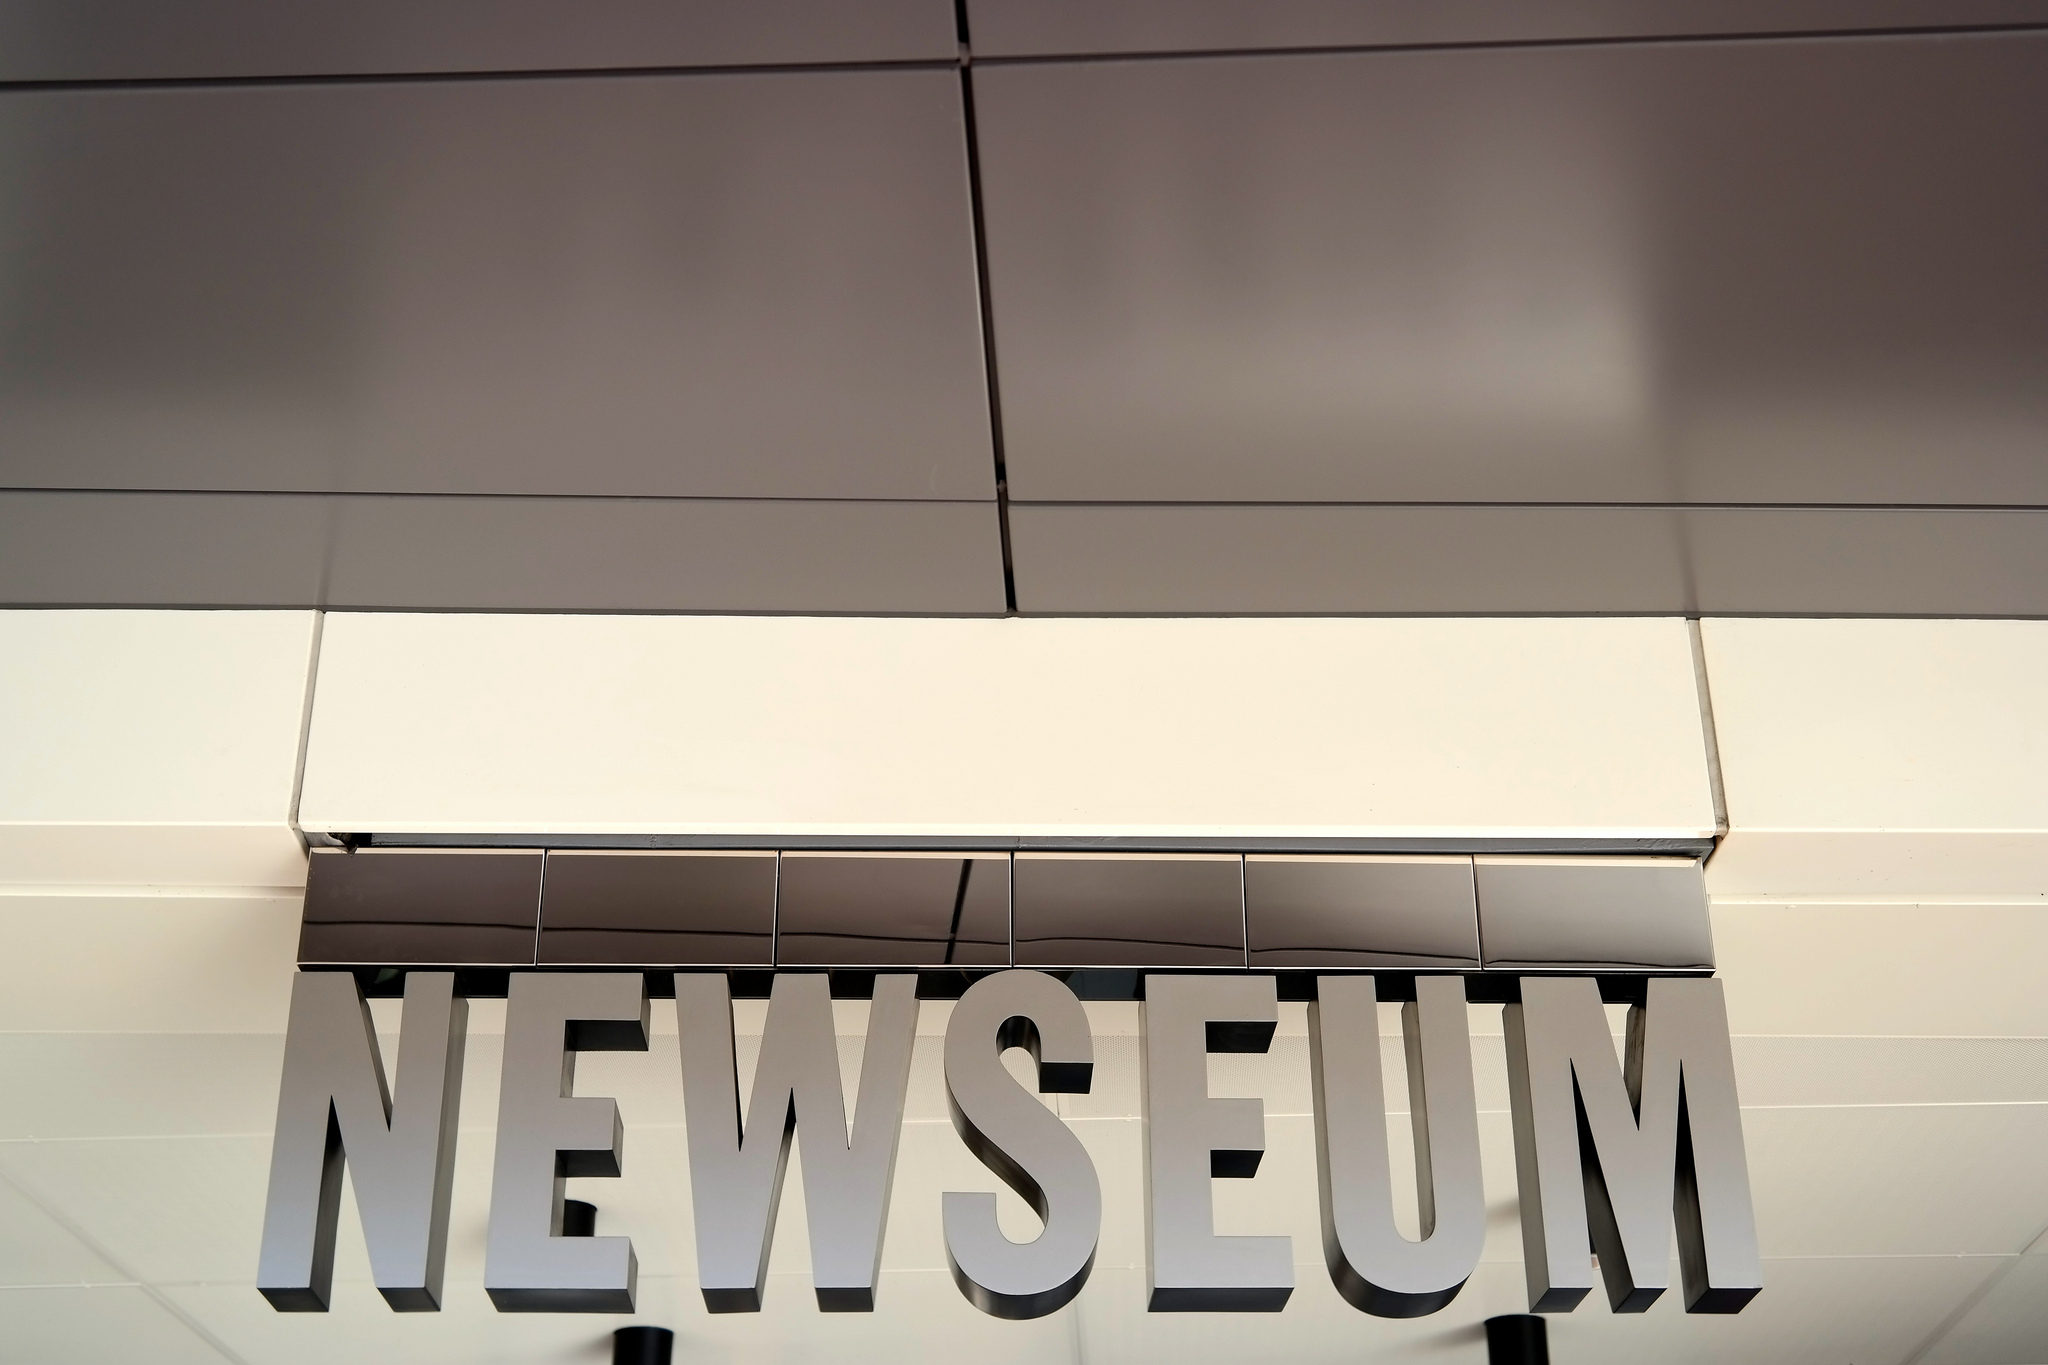 Journalism at the Crossroads: A Visit to the Newseum